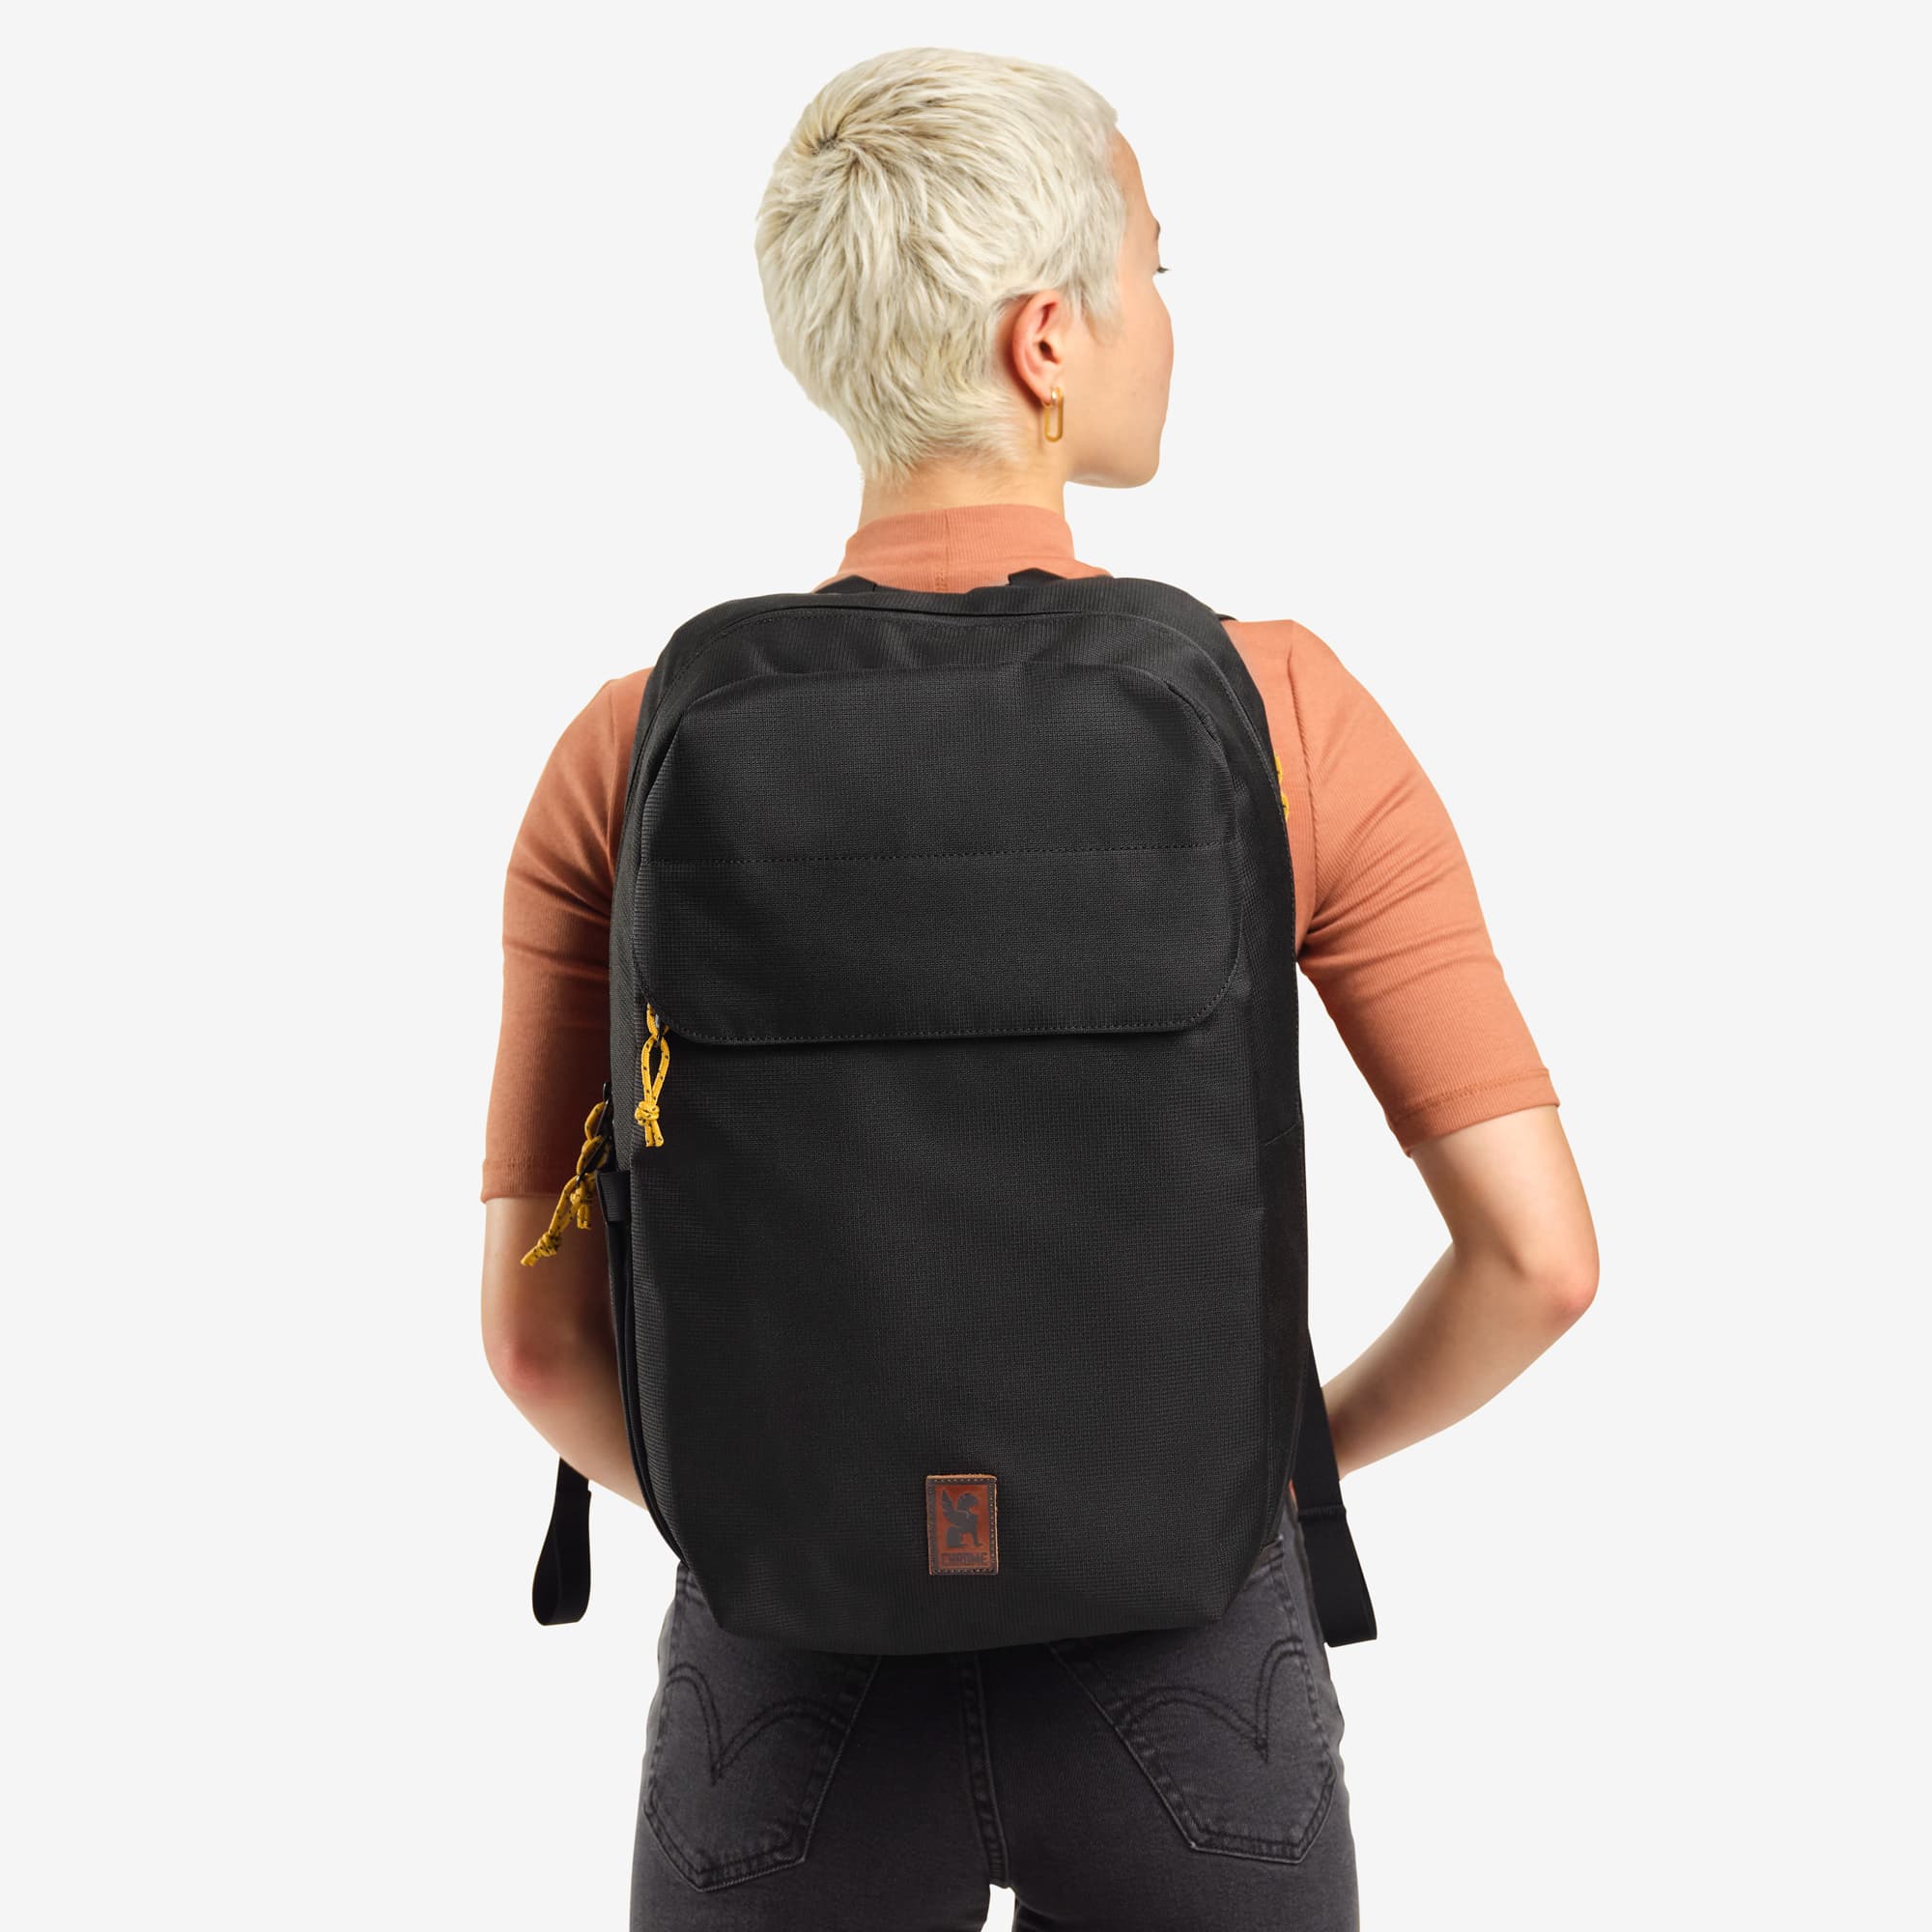 Ruckas 23L Backpack in black worn by a woman #color_black